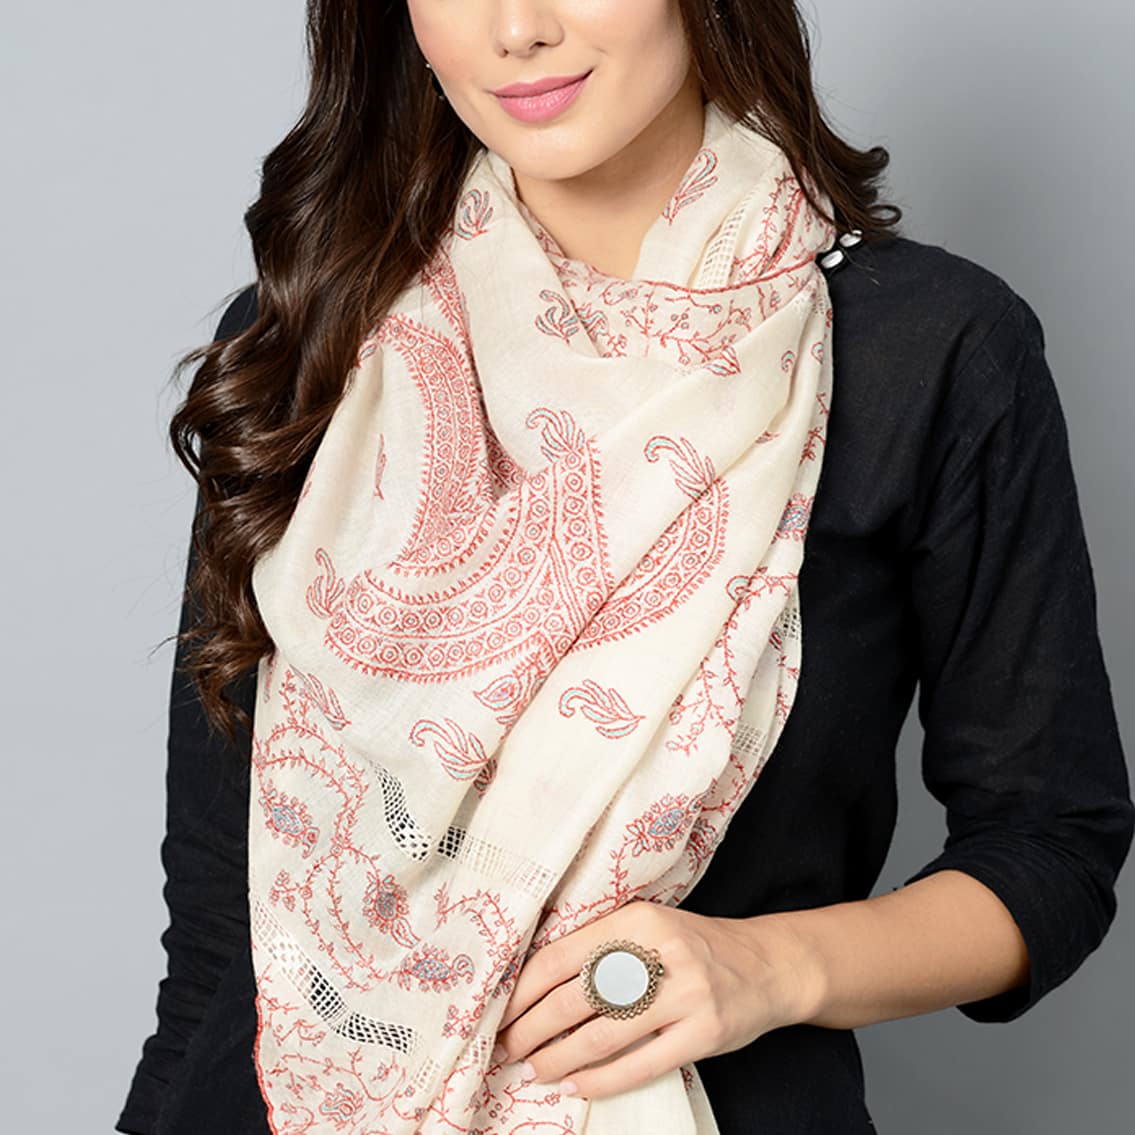 White & Maroon Hand-Embroidered Cashmere Pashmina Stole